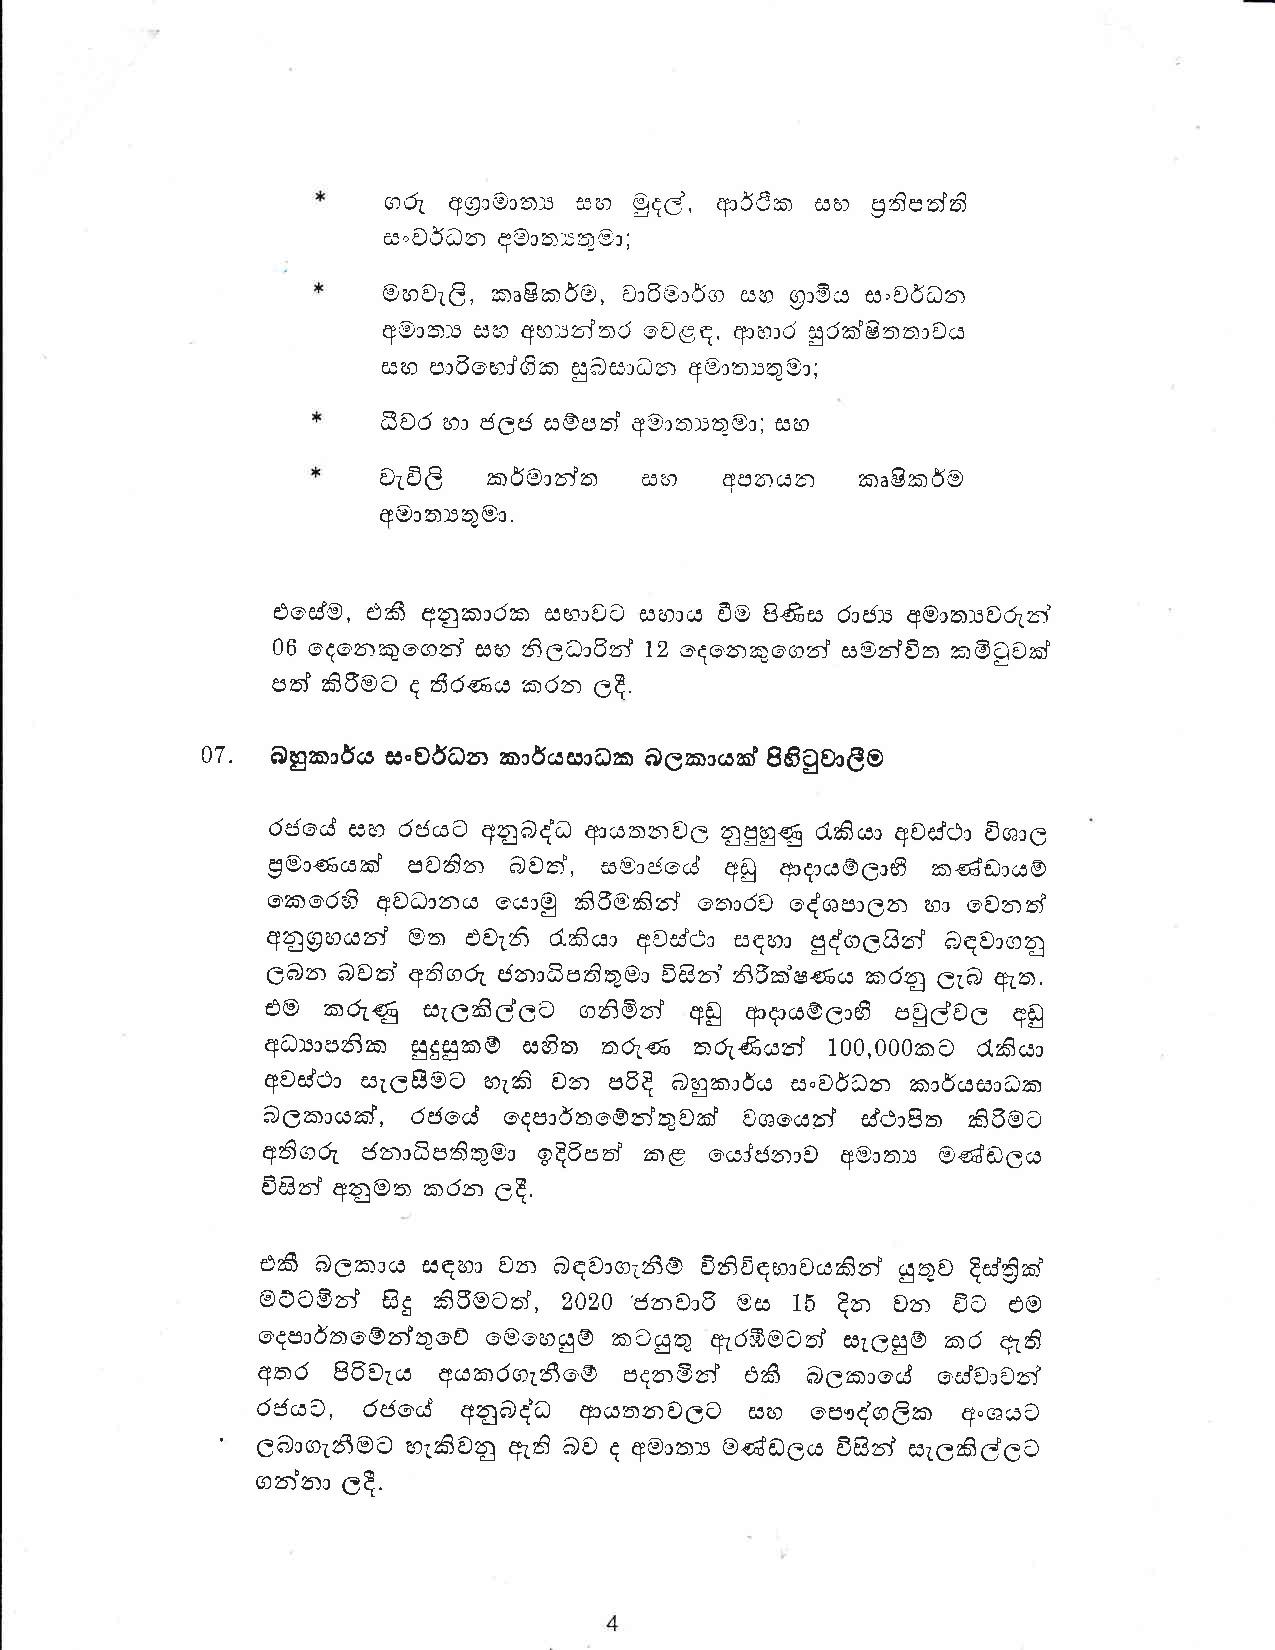 Cabinet Decision S on 10.12.2019 page 004